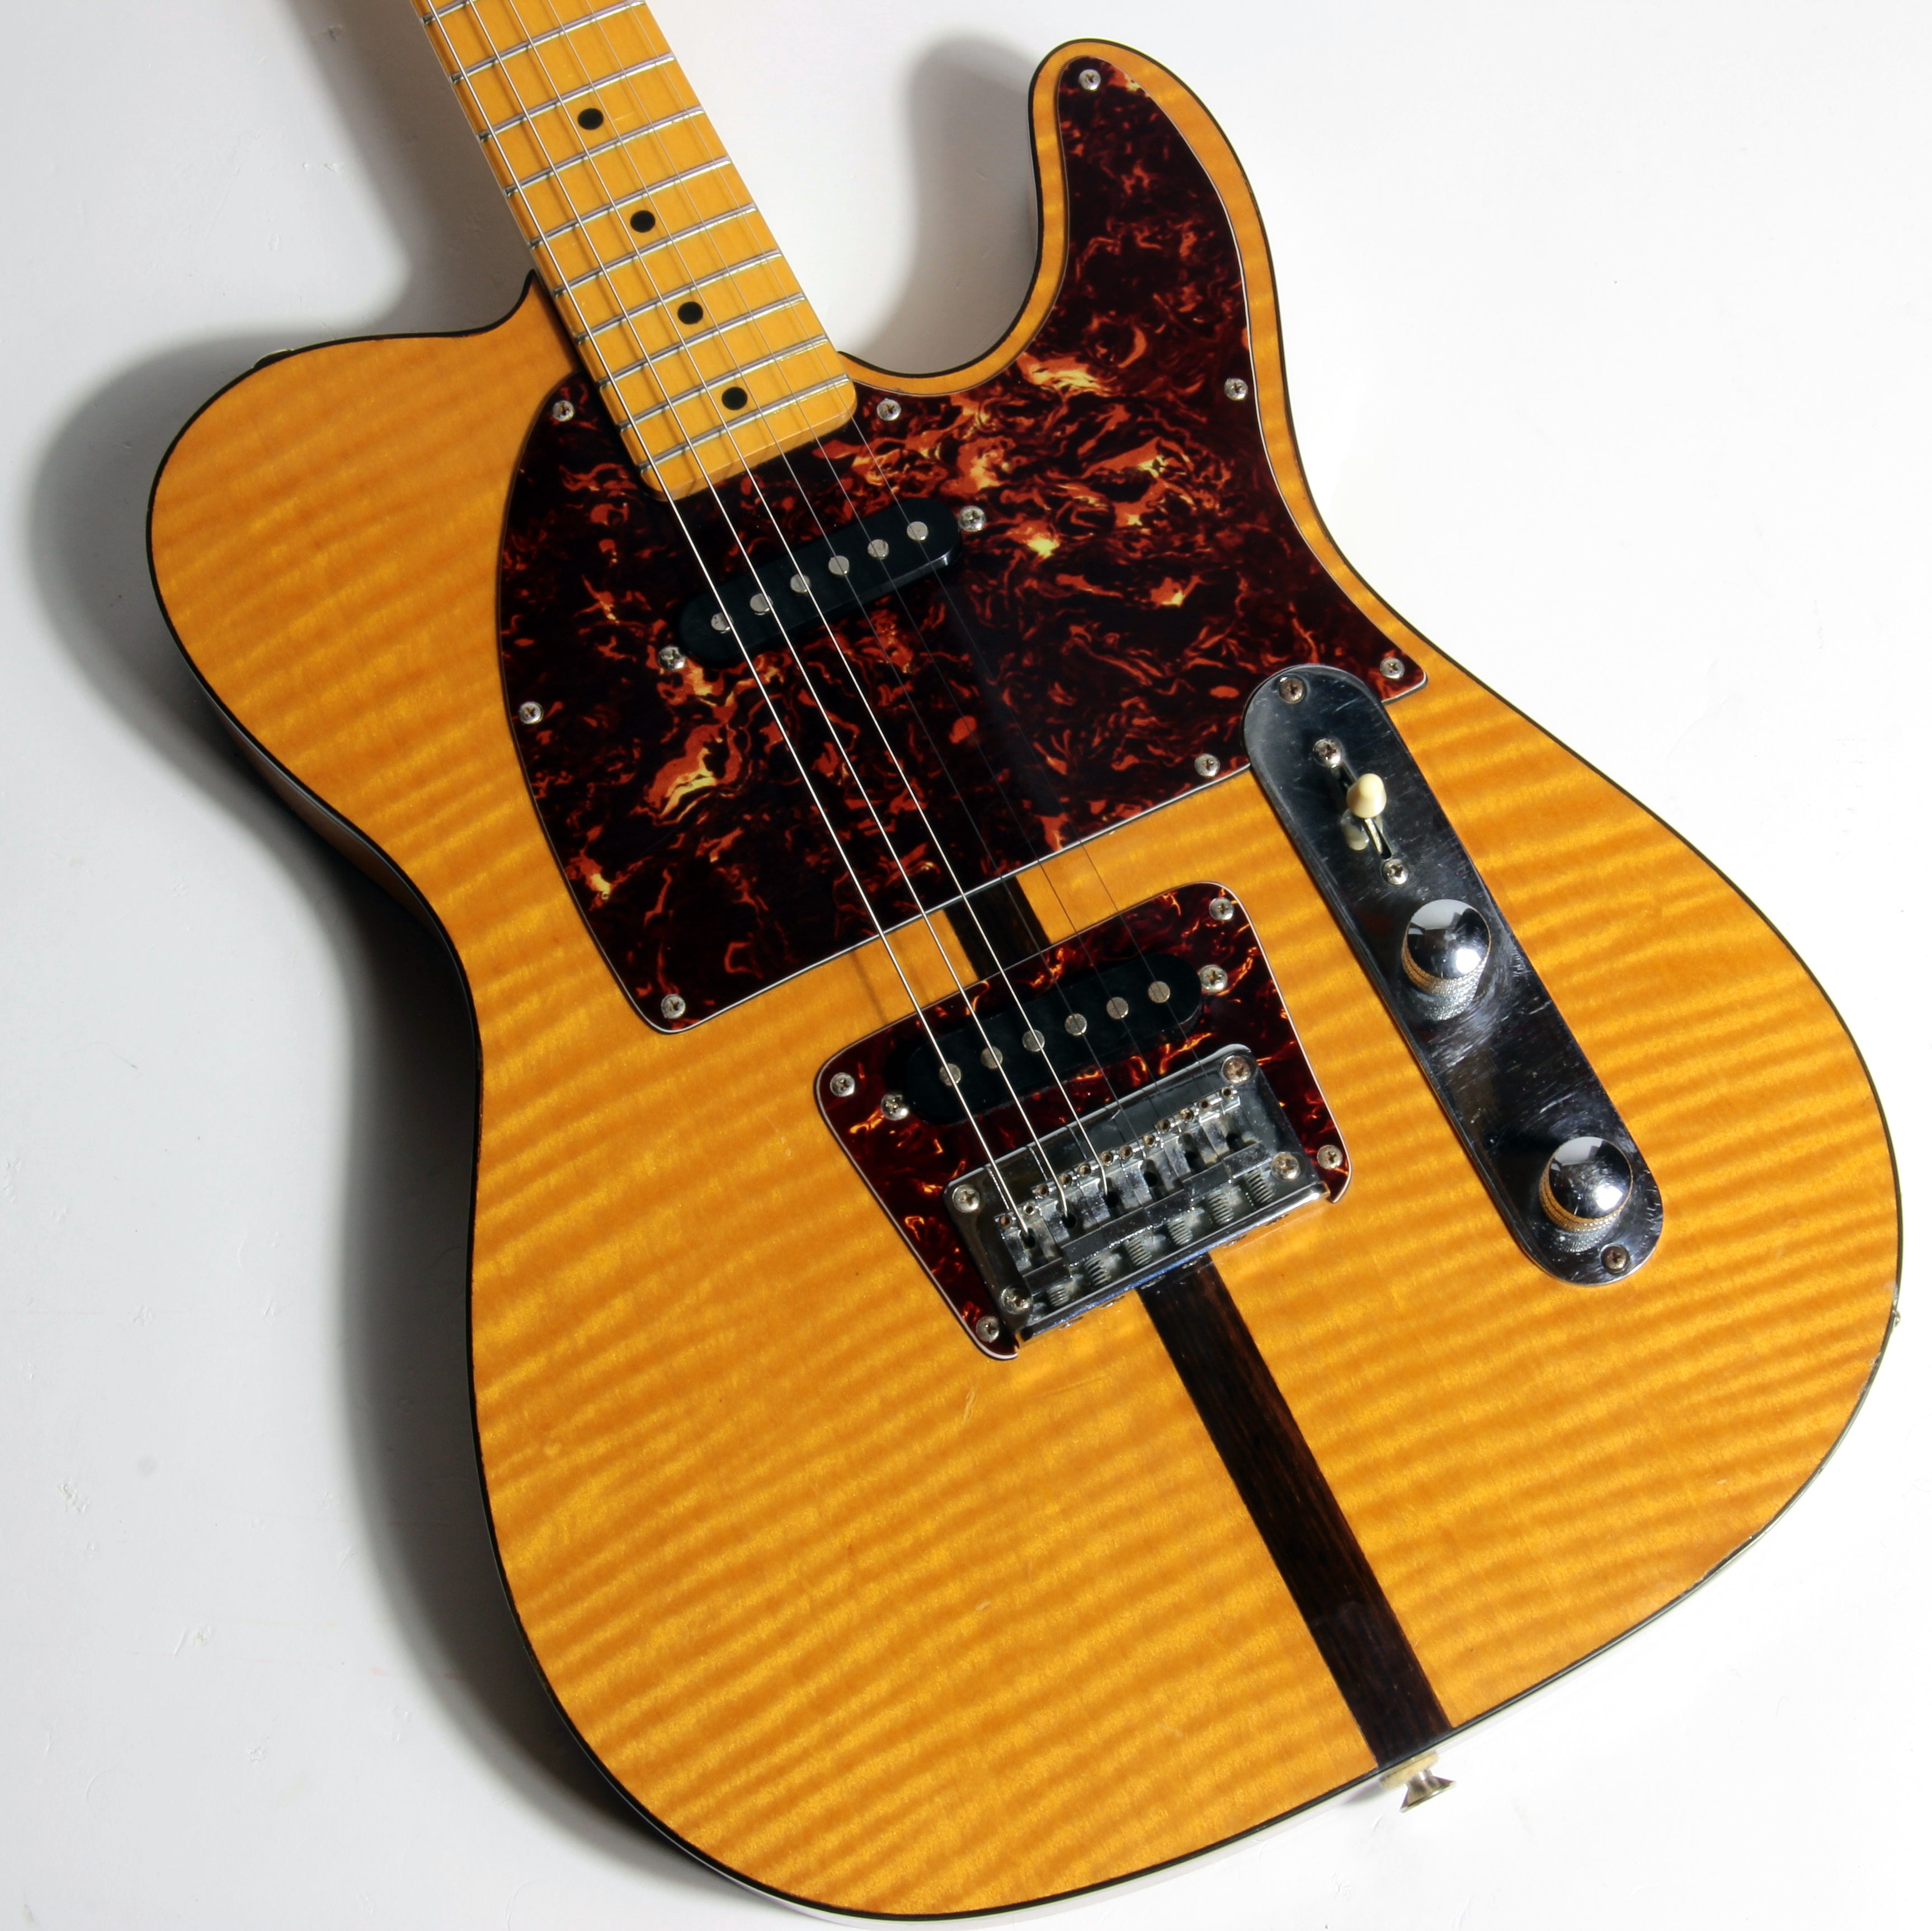 *SOLD*  c. 1985 Hohner The Prinz Madcat Tele Lawsuit Headstock - w/ Fender Telecaster Case, Prince style